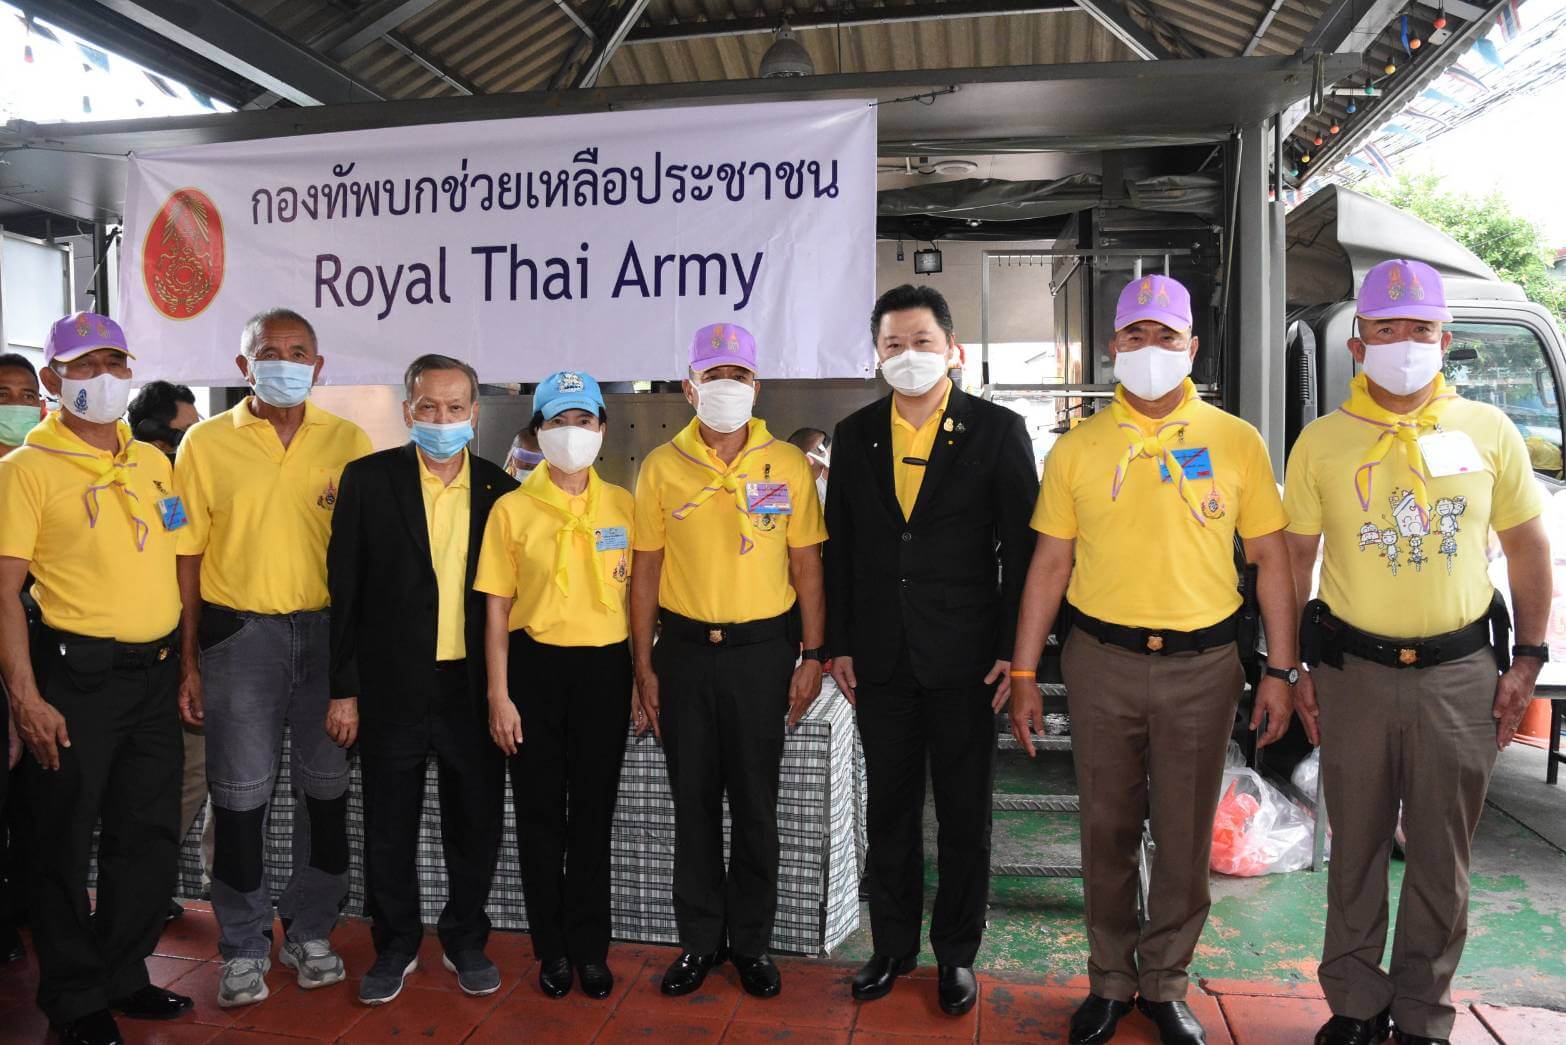 Royal Thai Army, CP-CPF, and Khlong Toei community host a merit making activity for the late King Rama IX